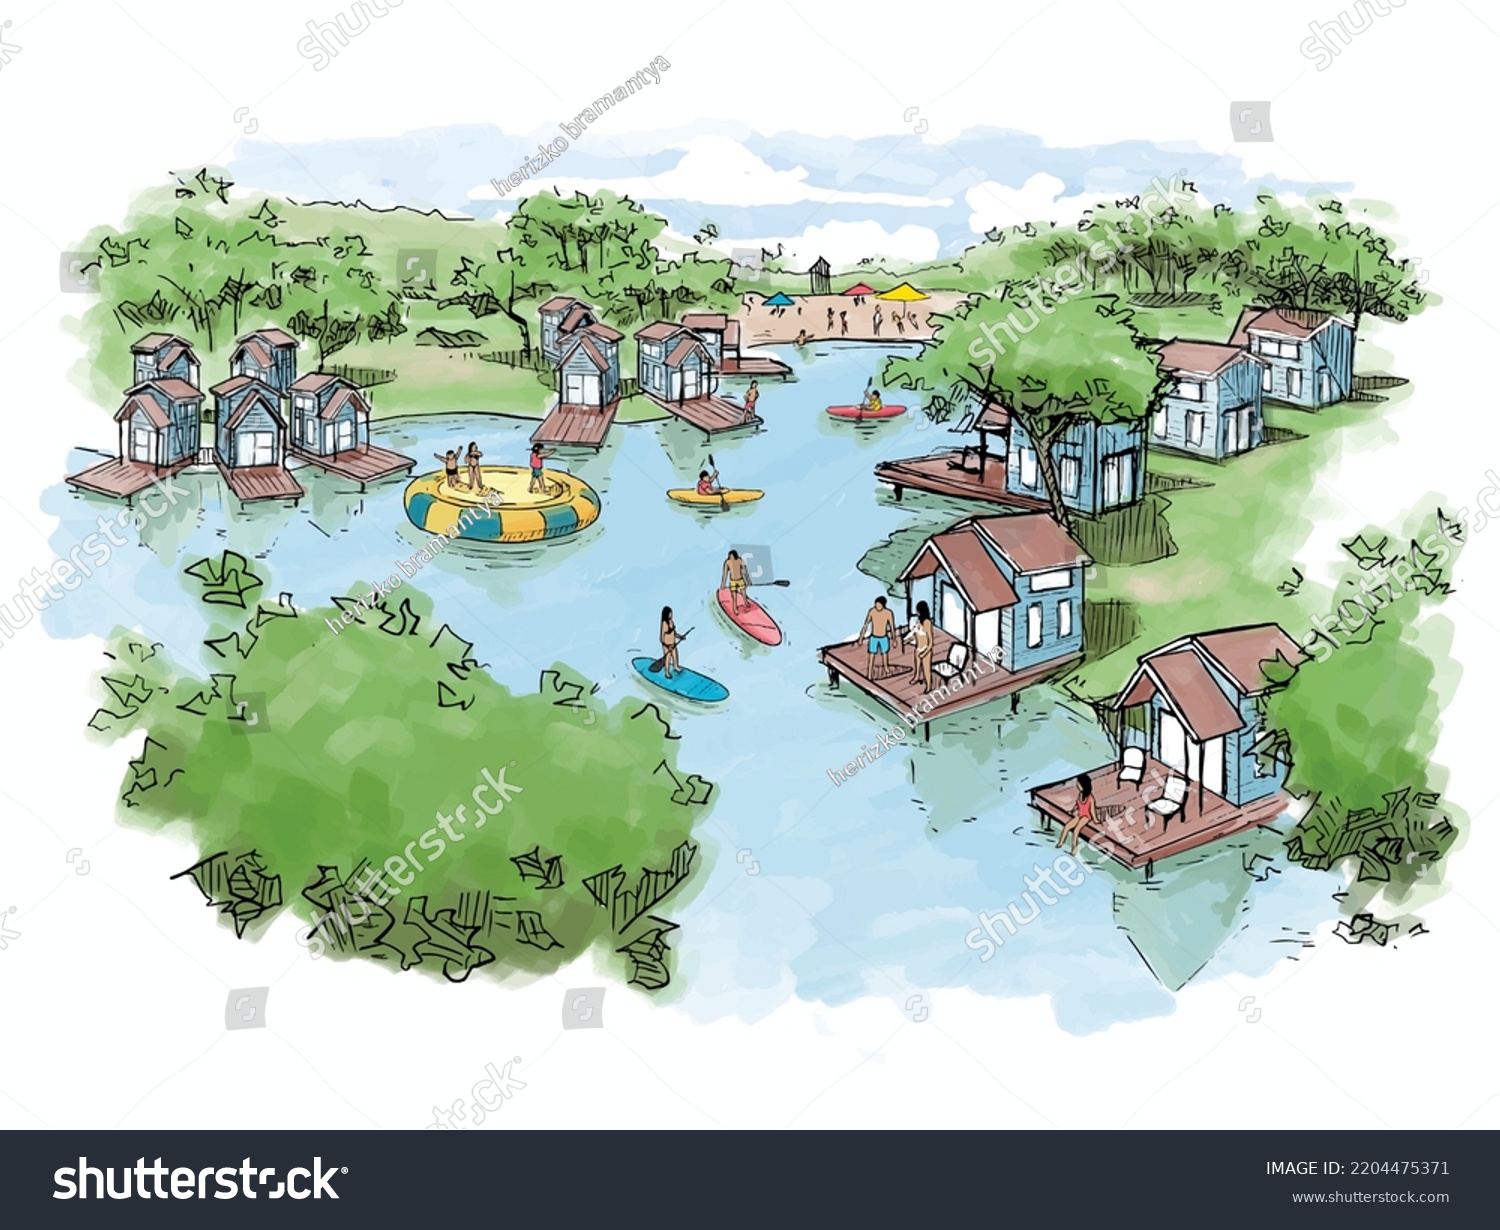 SVG of cottages, bungalow, resort,hotel by the lake as a summer vacation destination for family and friends. people having fun playing in water buoys, canoeing, paddling, etc. for airbnb, the innkeeper svg